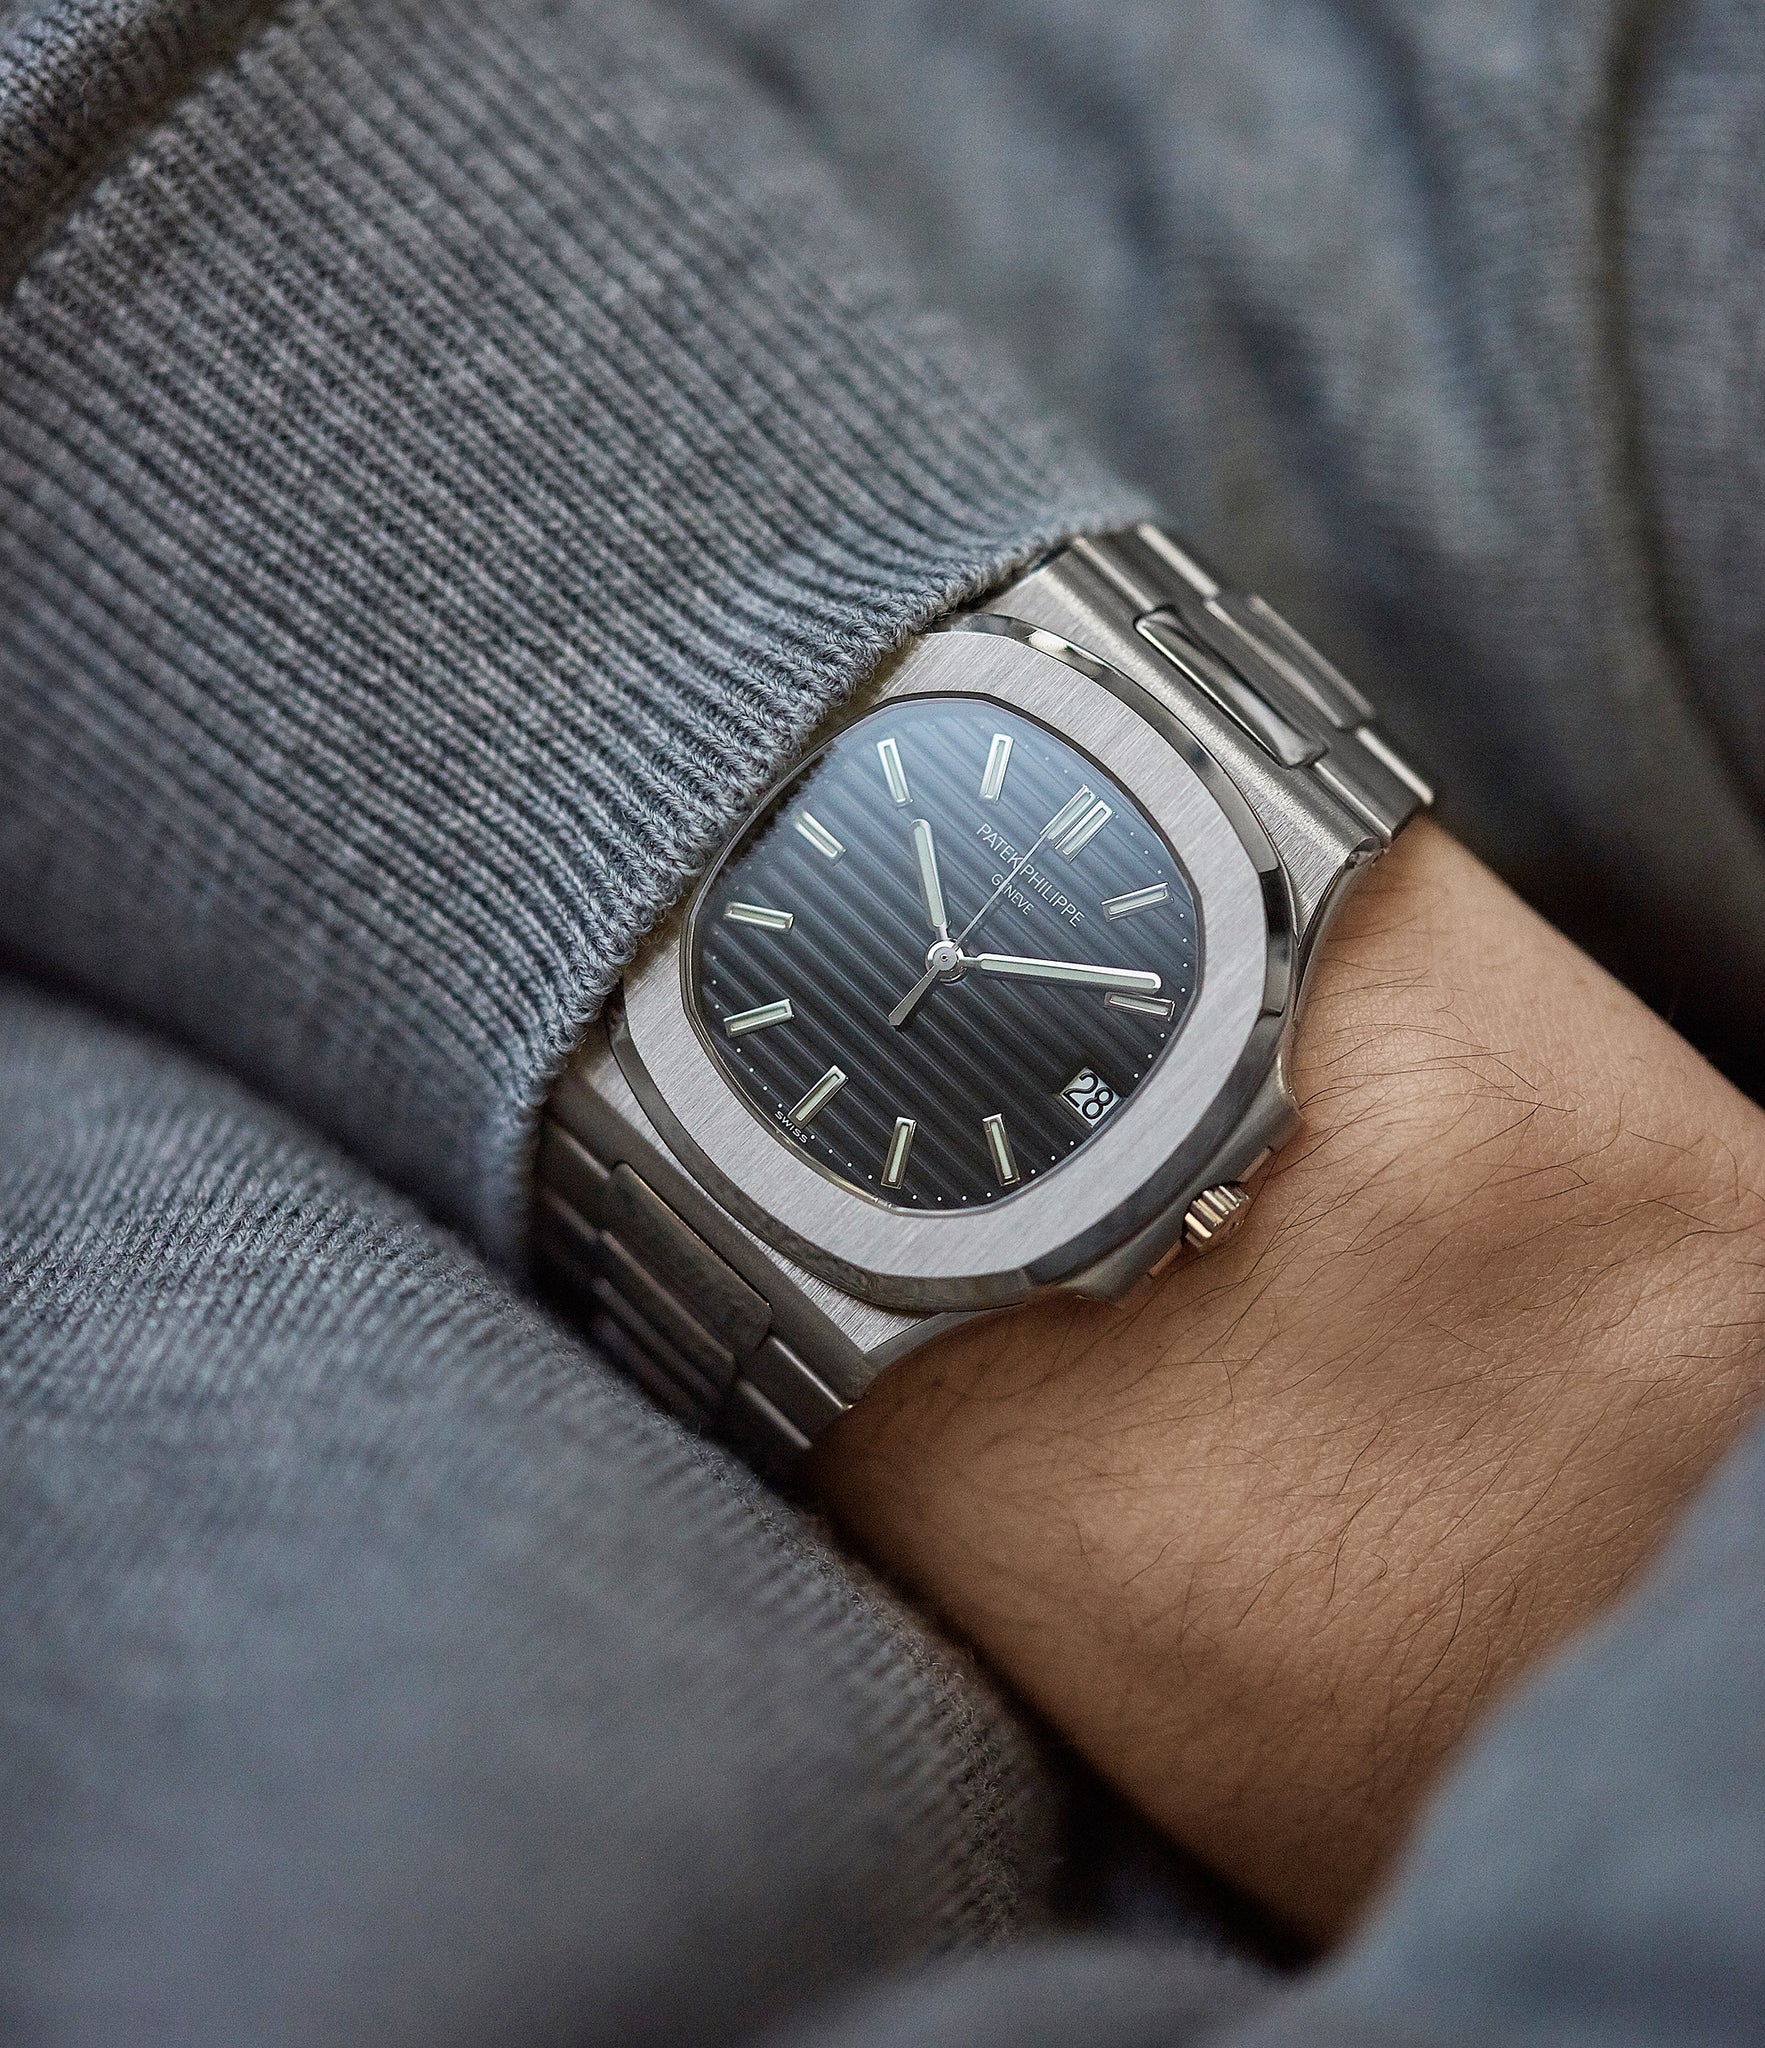 on the wrist Patek Philippe Nautilus 3711/1G-001 white gold pre-owned watch for sale online at A Collected Man London UK specialist of rare watches